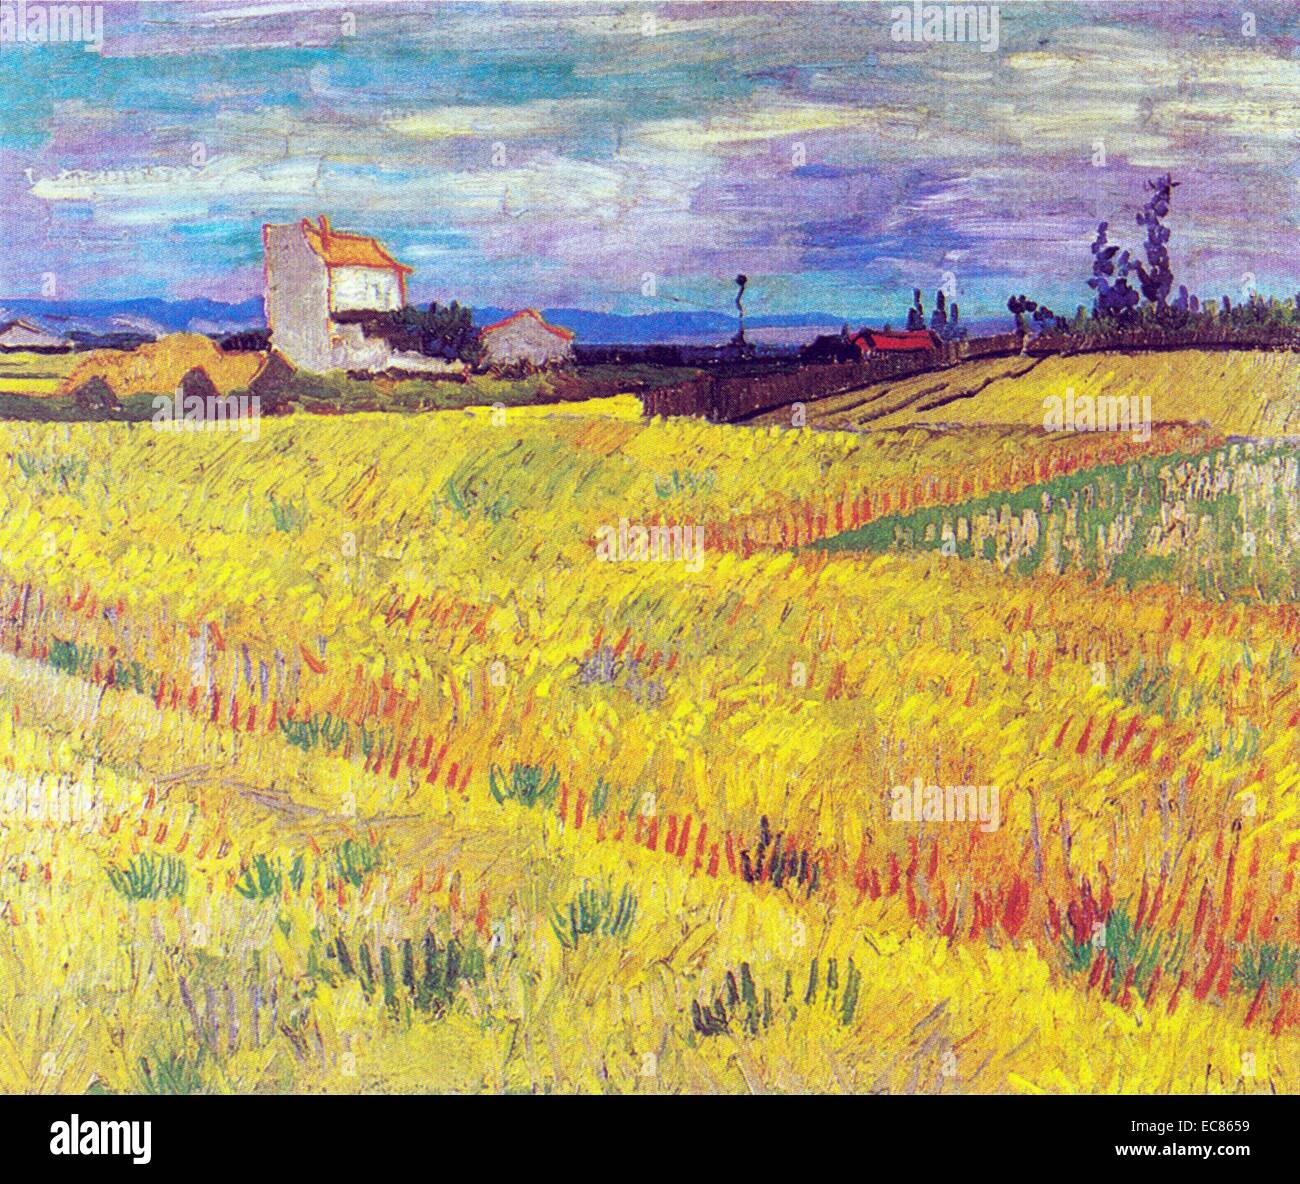 Wheatfield' by Vincent Van Gogh (1853-1890) a post-impressionist painter of Dutch origin. Dated 1889. Stock Photo